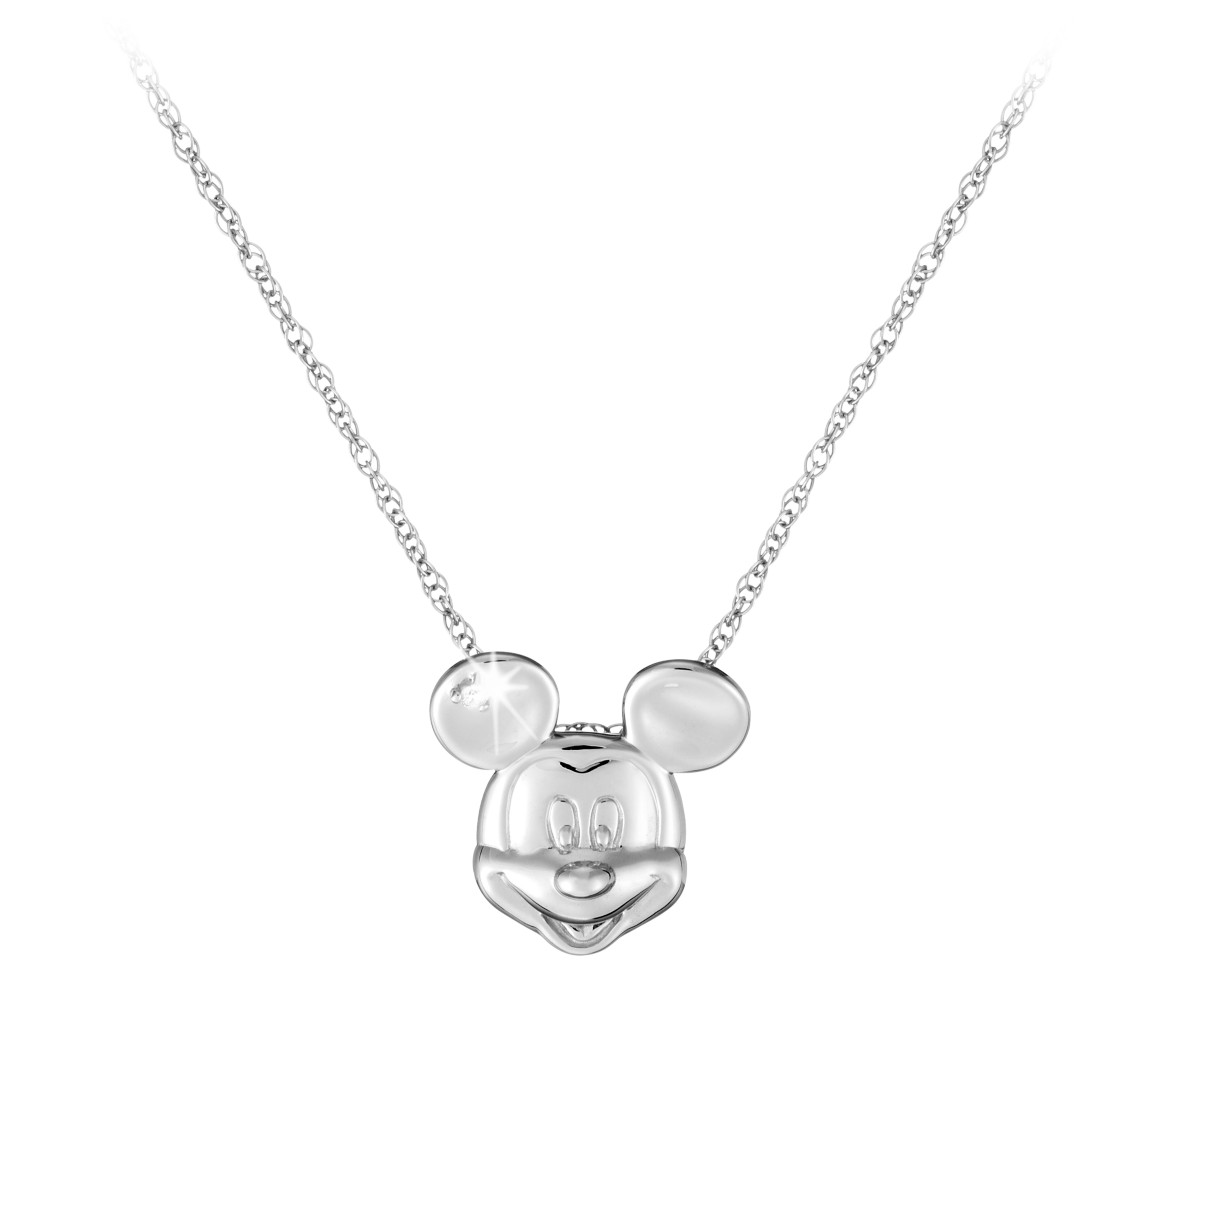 Mickey Mouse Necklace – Mickey Face